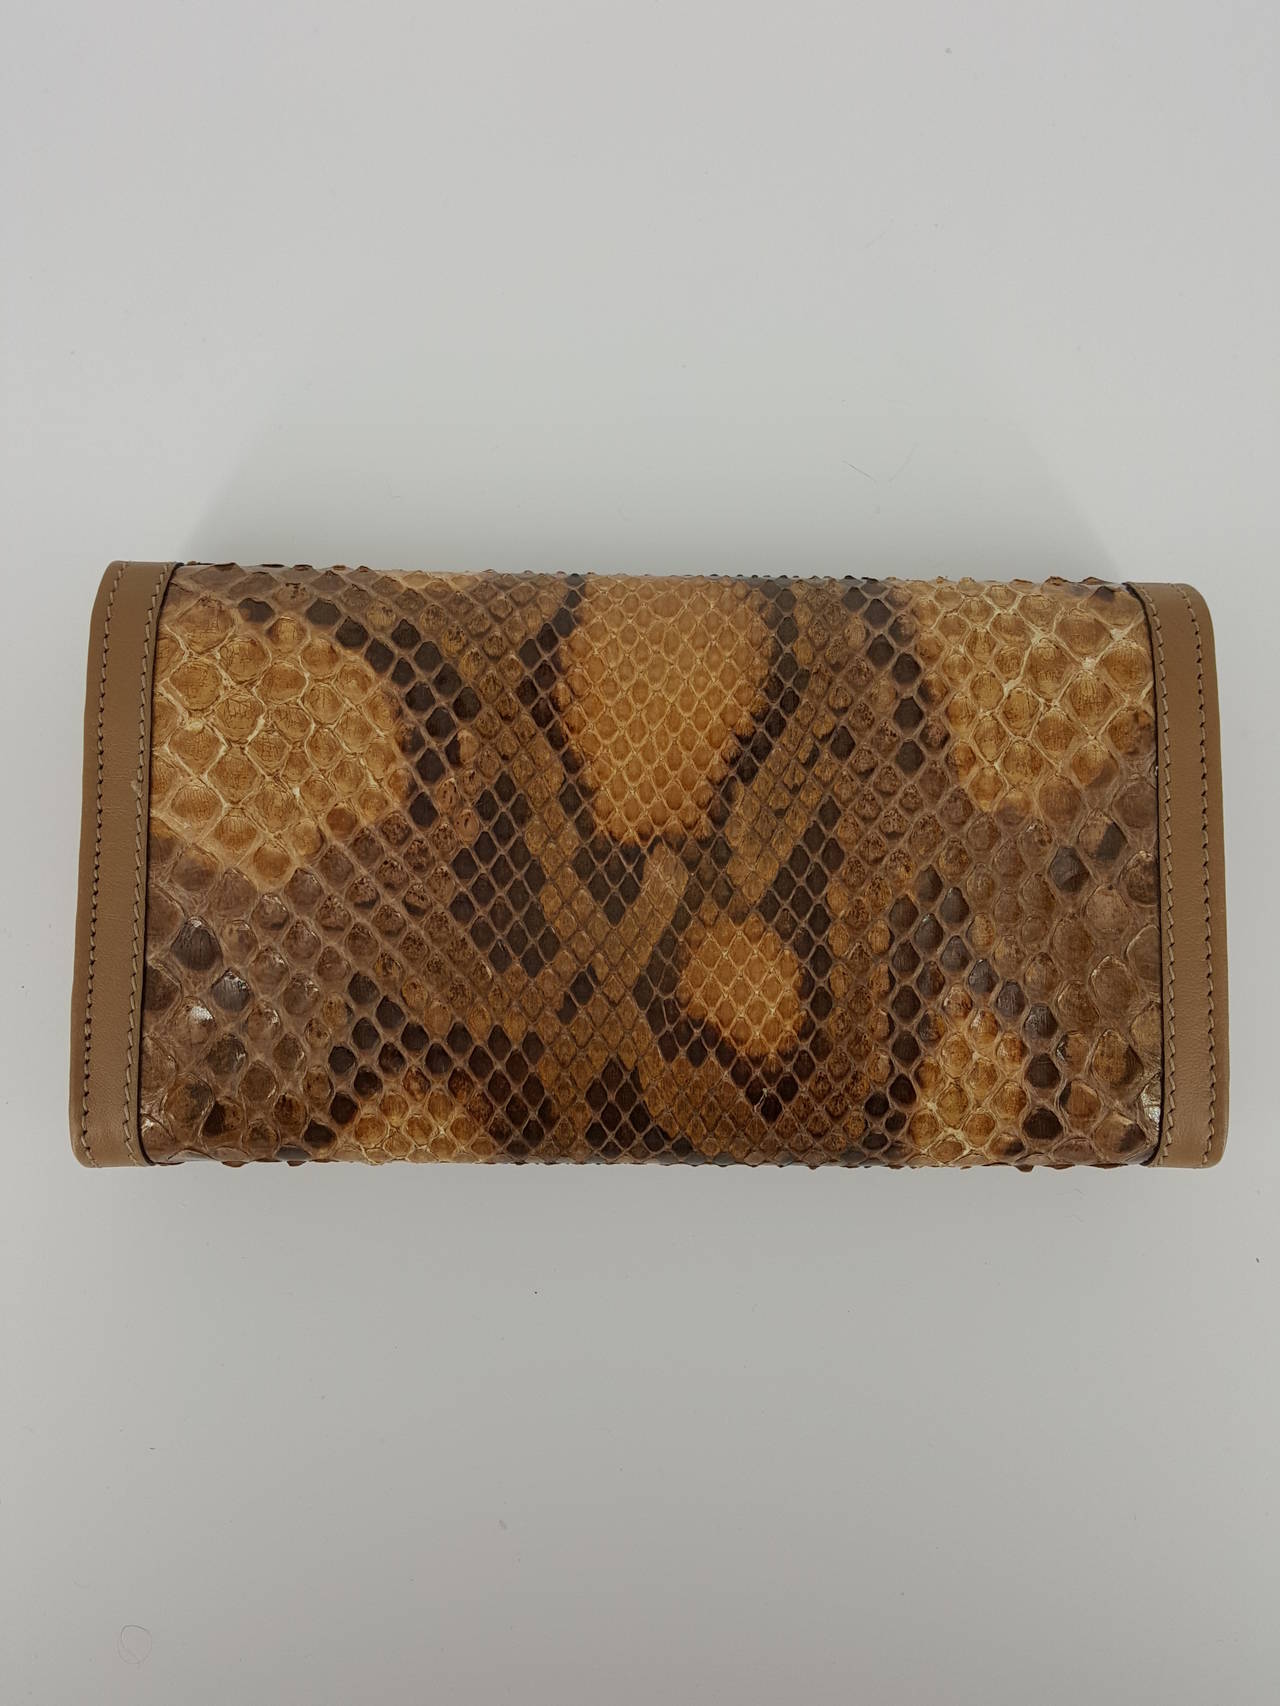 Women's Gucci Python Wallet With Gold Hardware- Never Used.